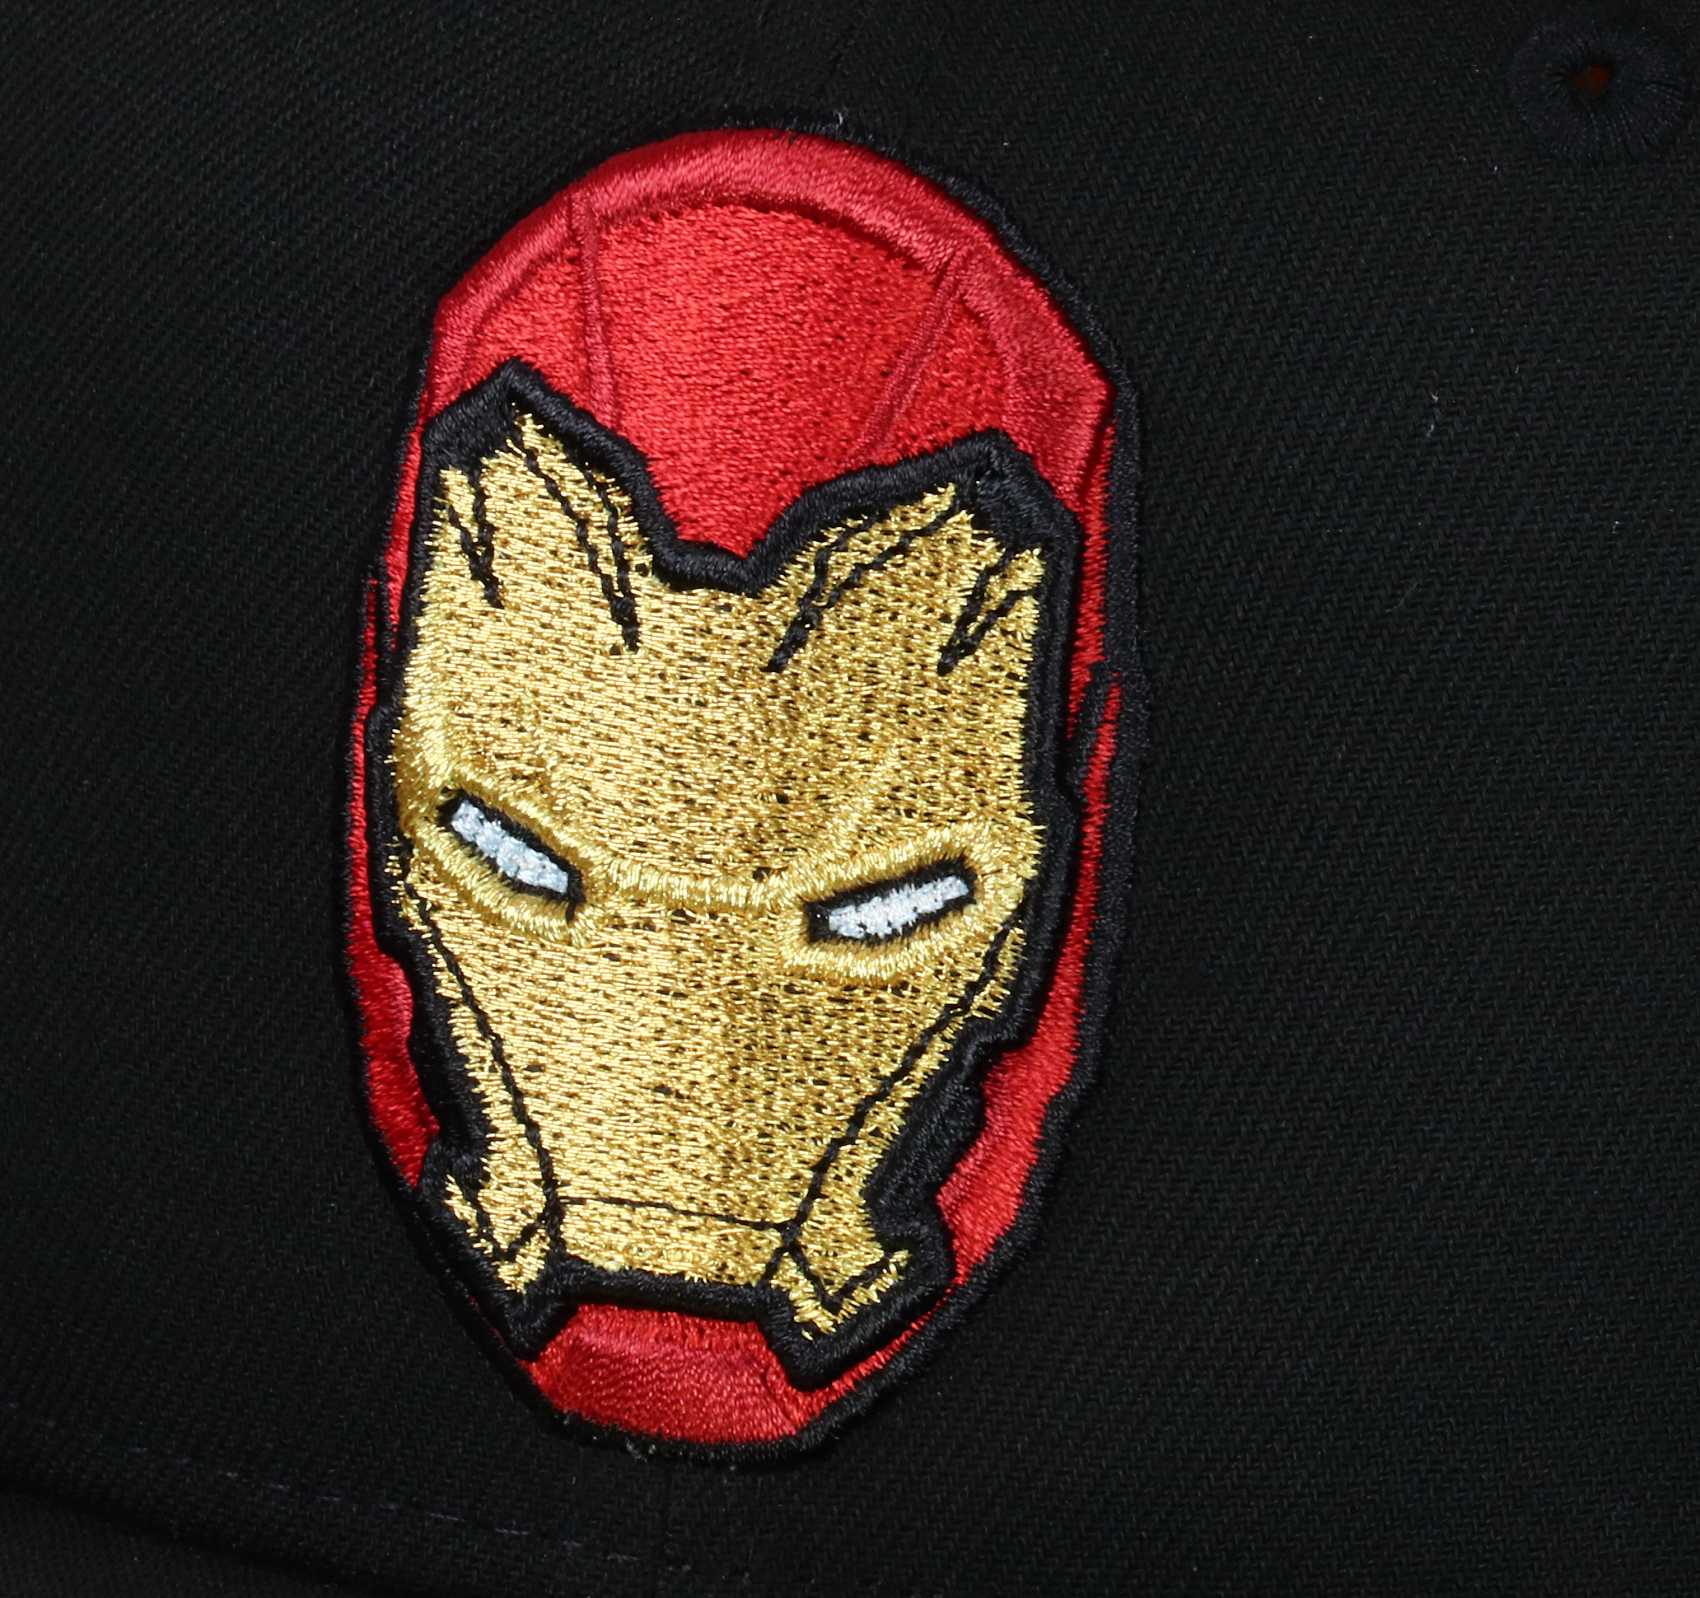 Iron Man Black 59Fifty Fitted Basecap New Era